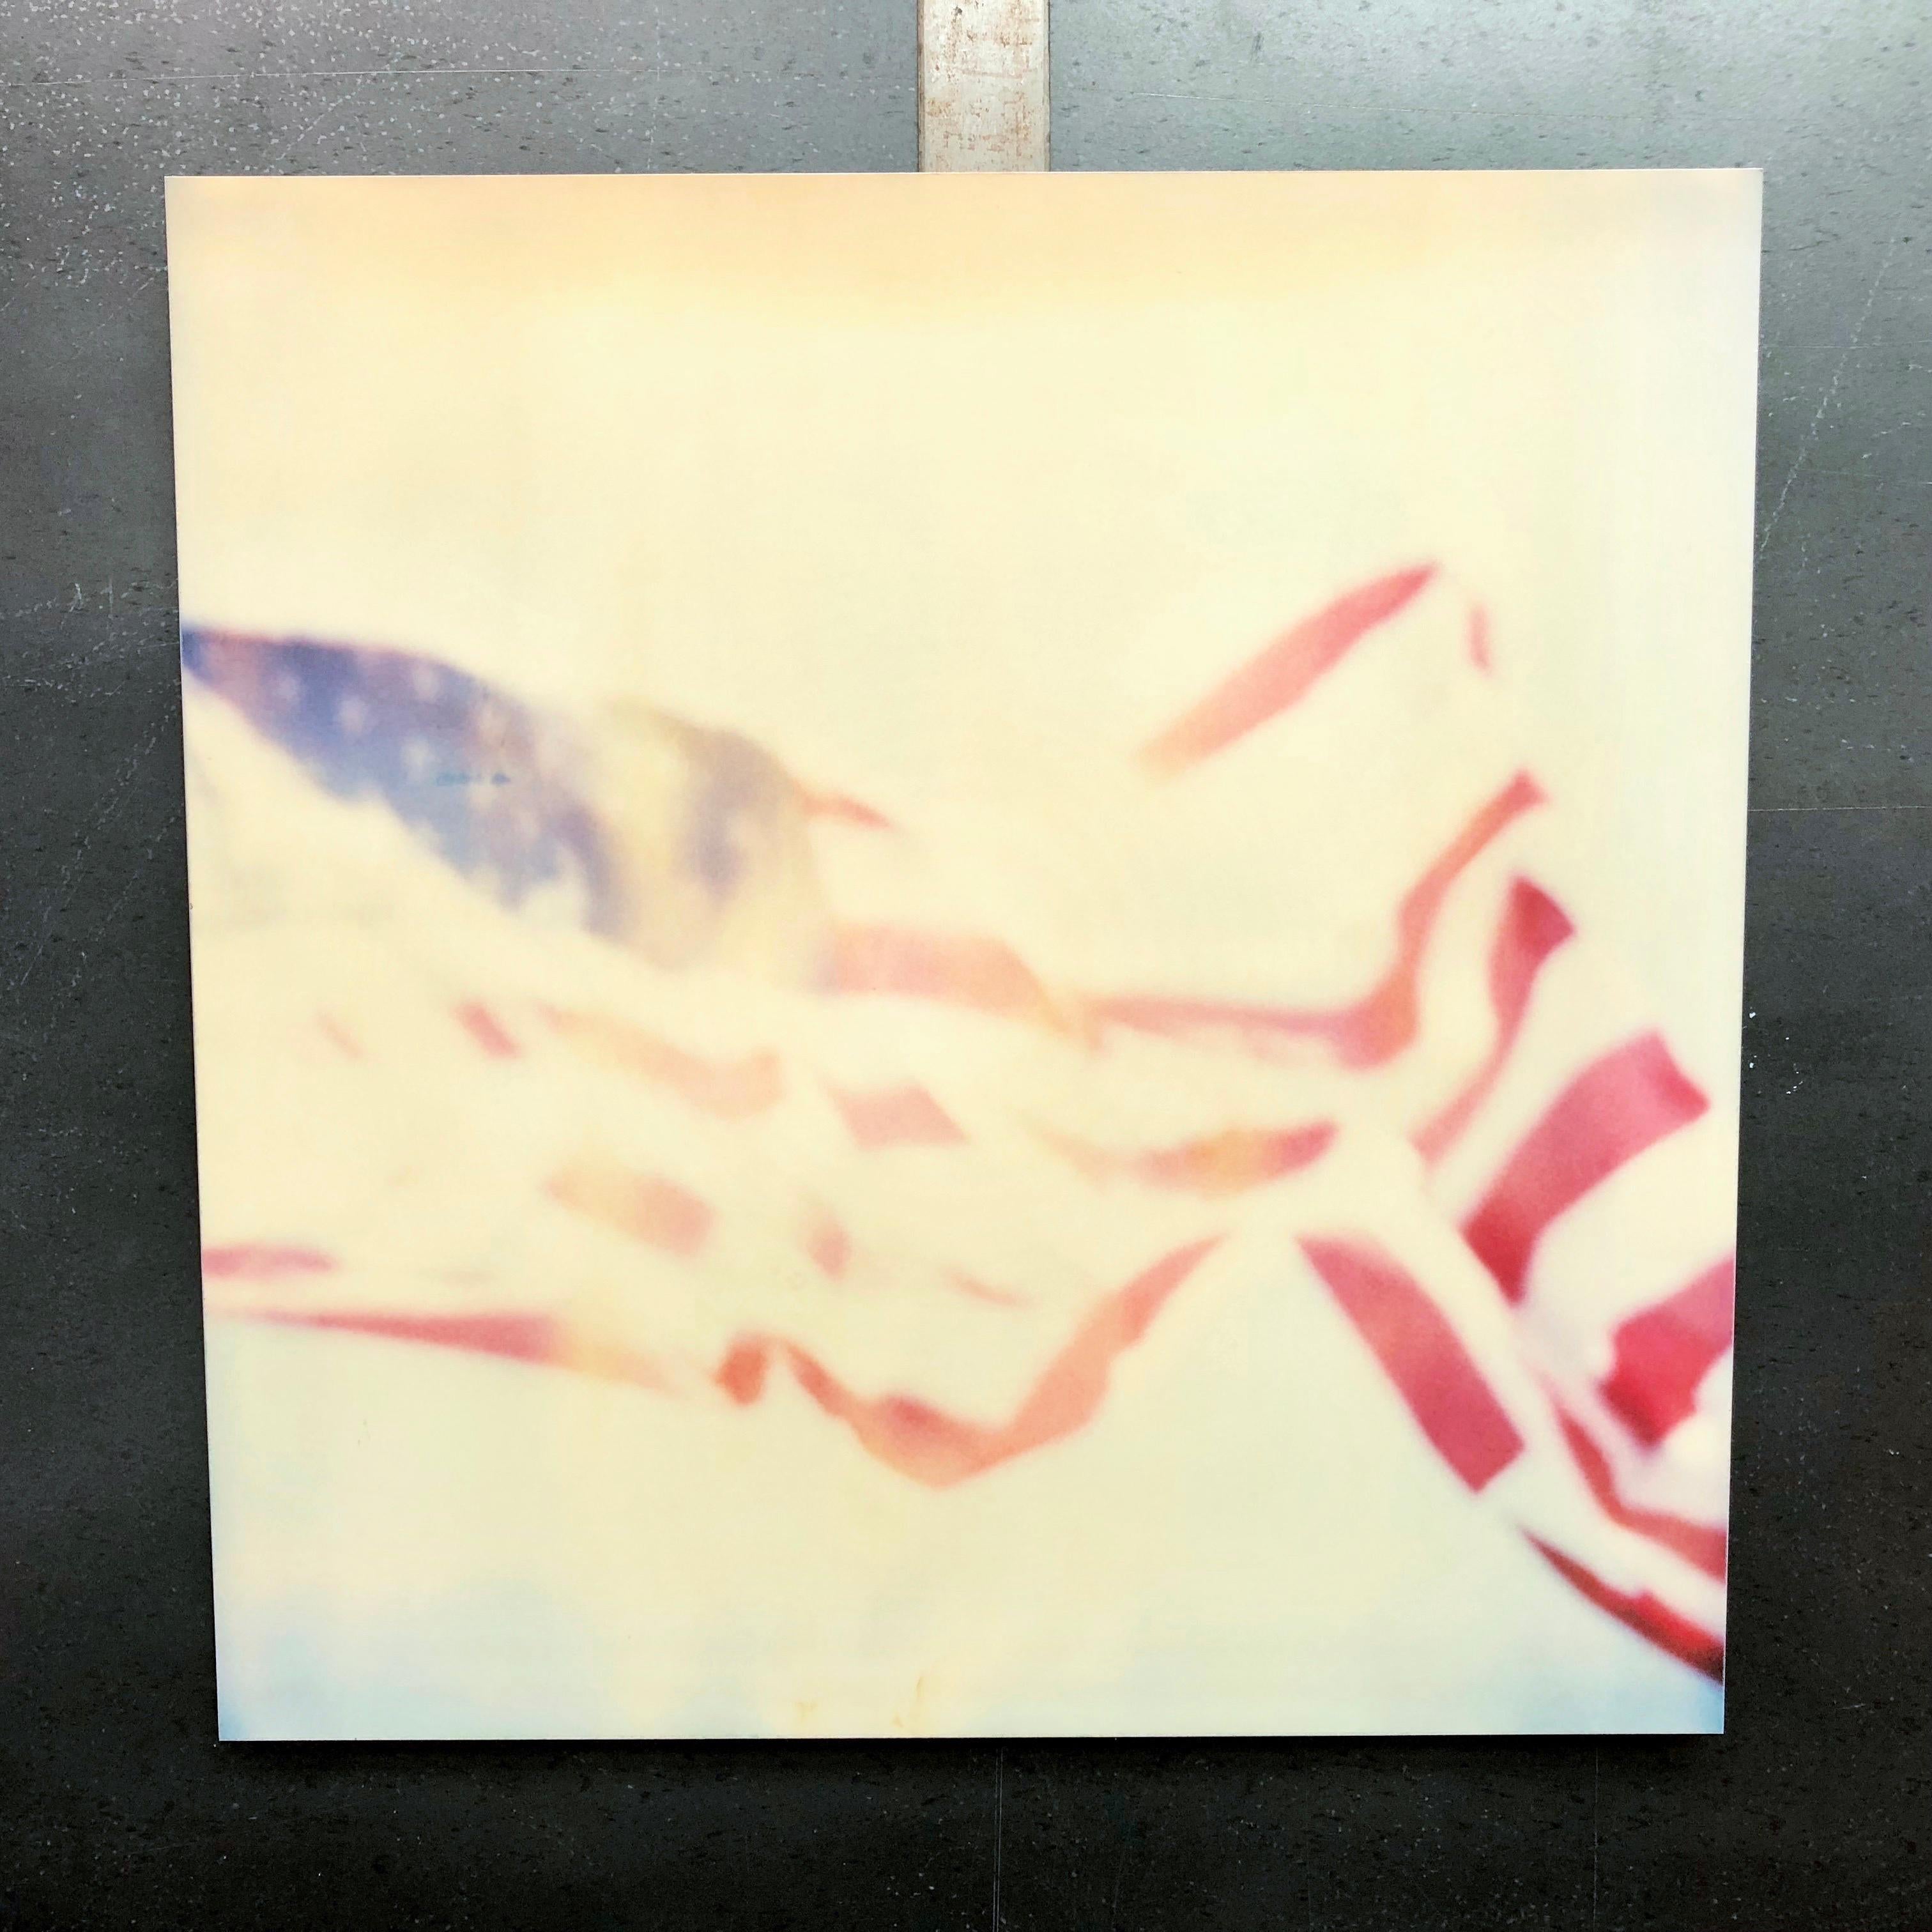 Primary Colors - Contemporary, Abstract, Landscape, USA, Polaroid, Flag For Sale 2